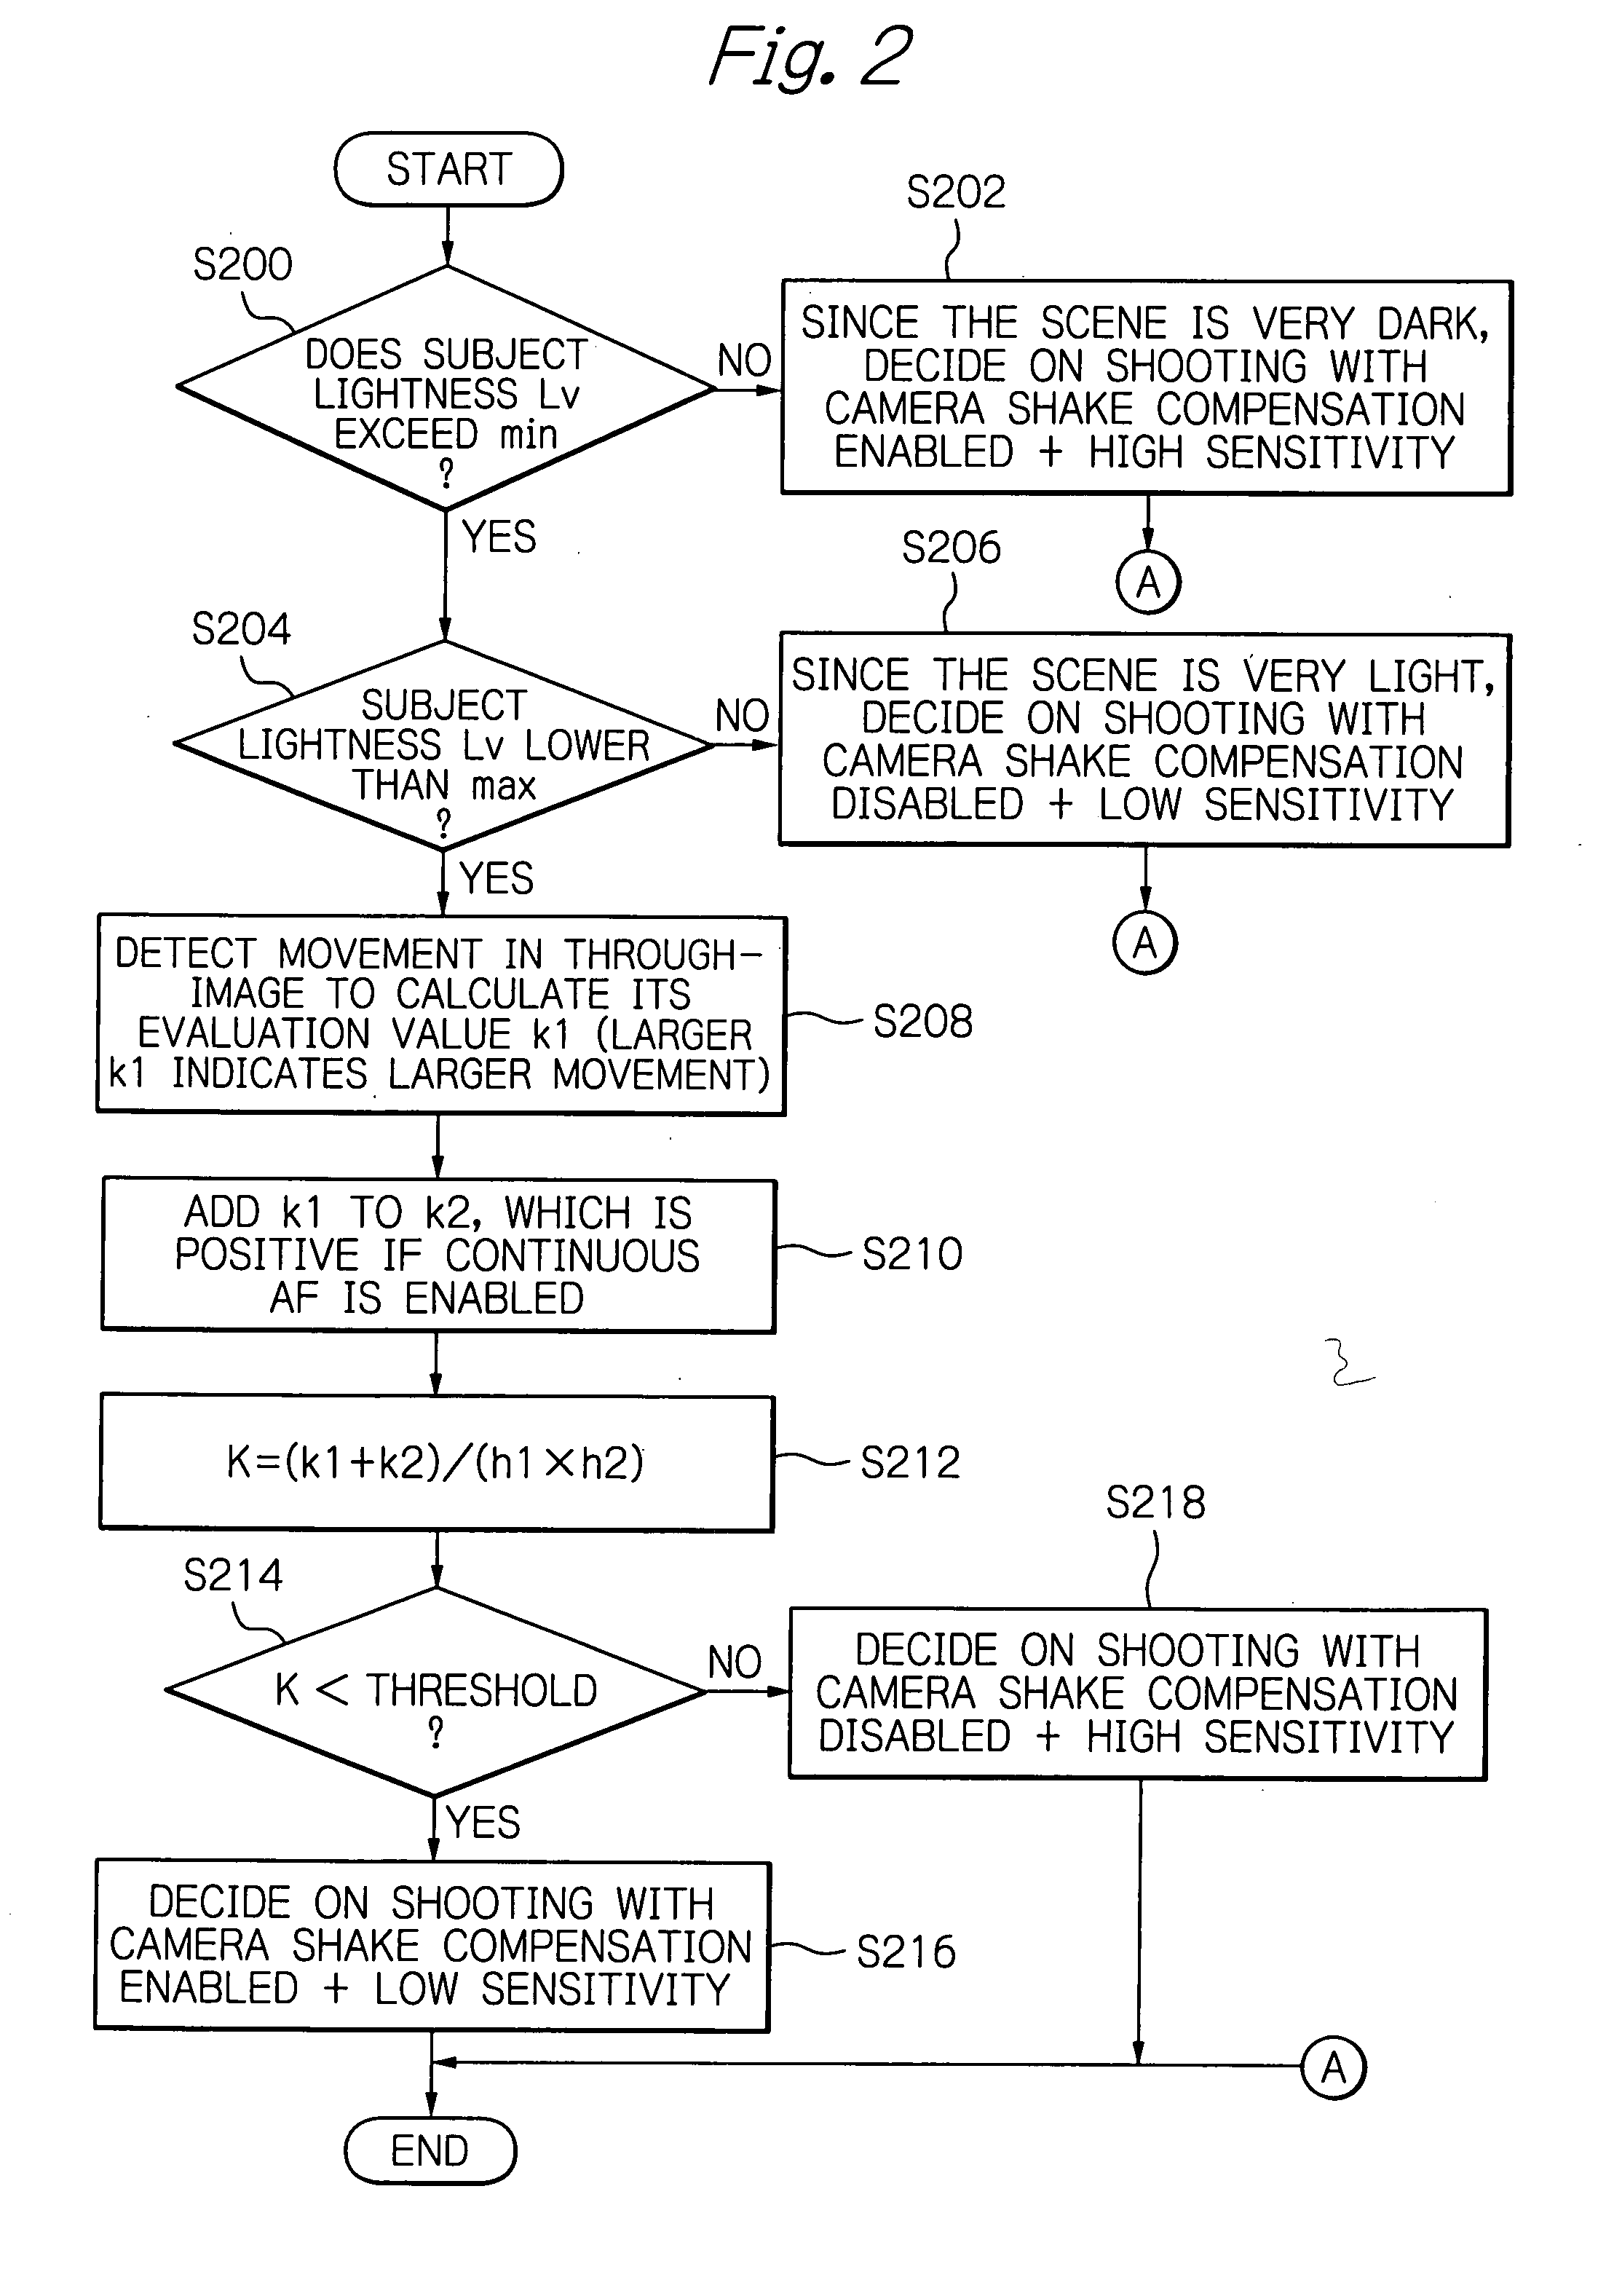 Digital imaging apparatus with camera shake compensation and adaptive sensitivity switching function